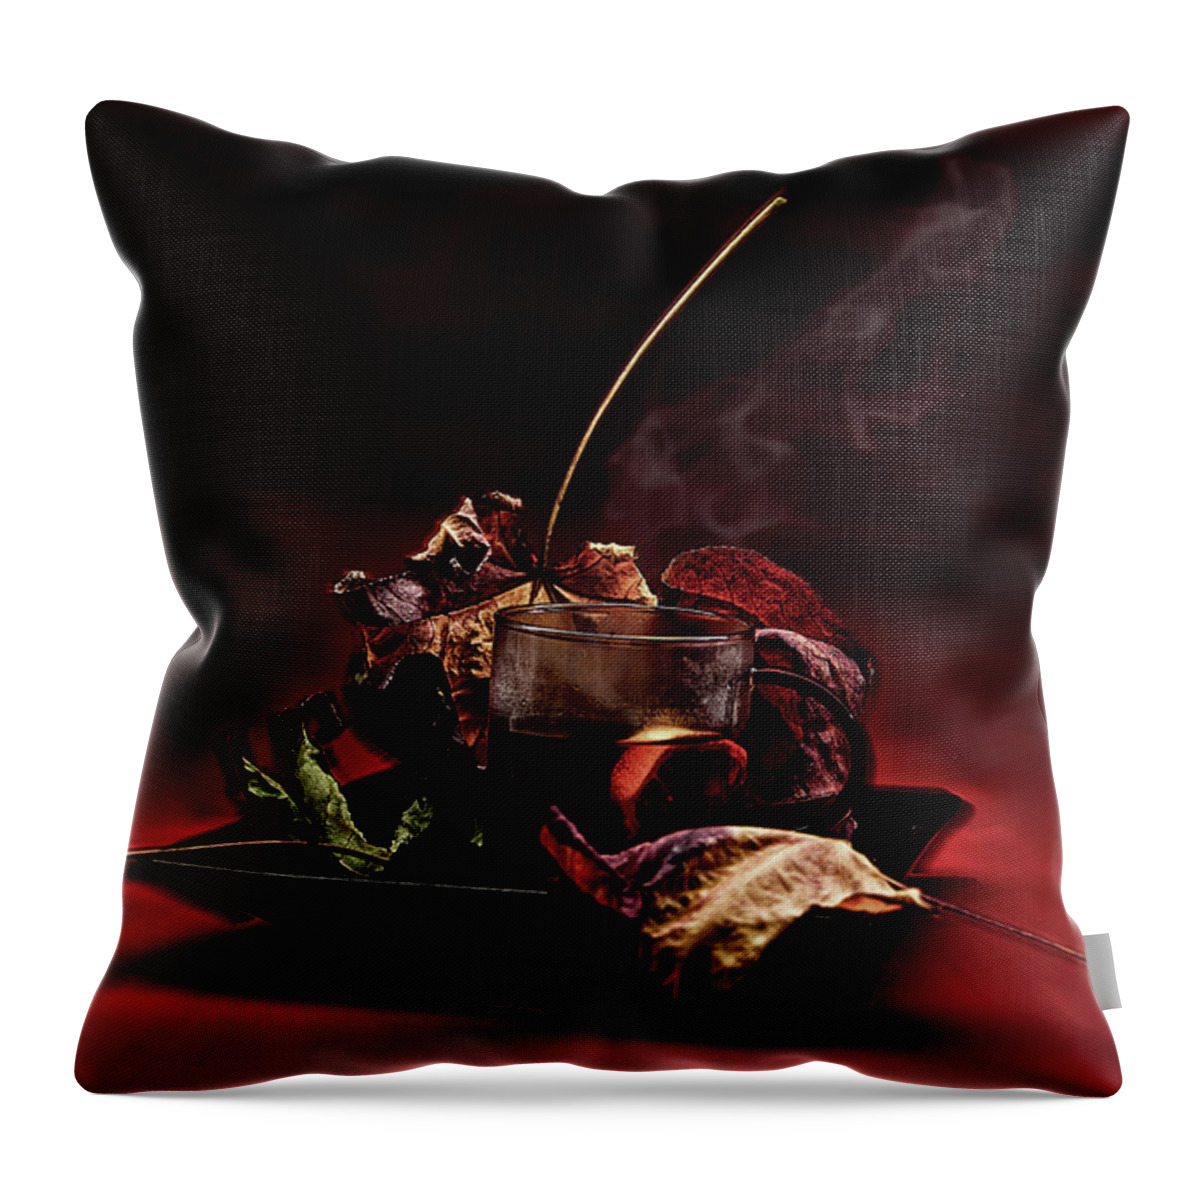 Cop Throw Pillow featuring the photograph Cup o' Tea by Andrei SKY